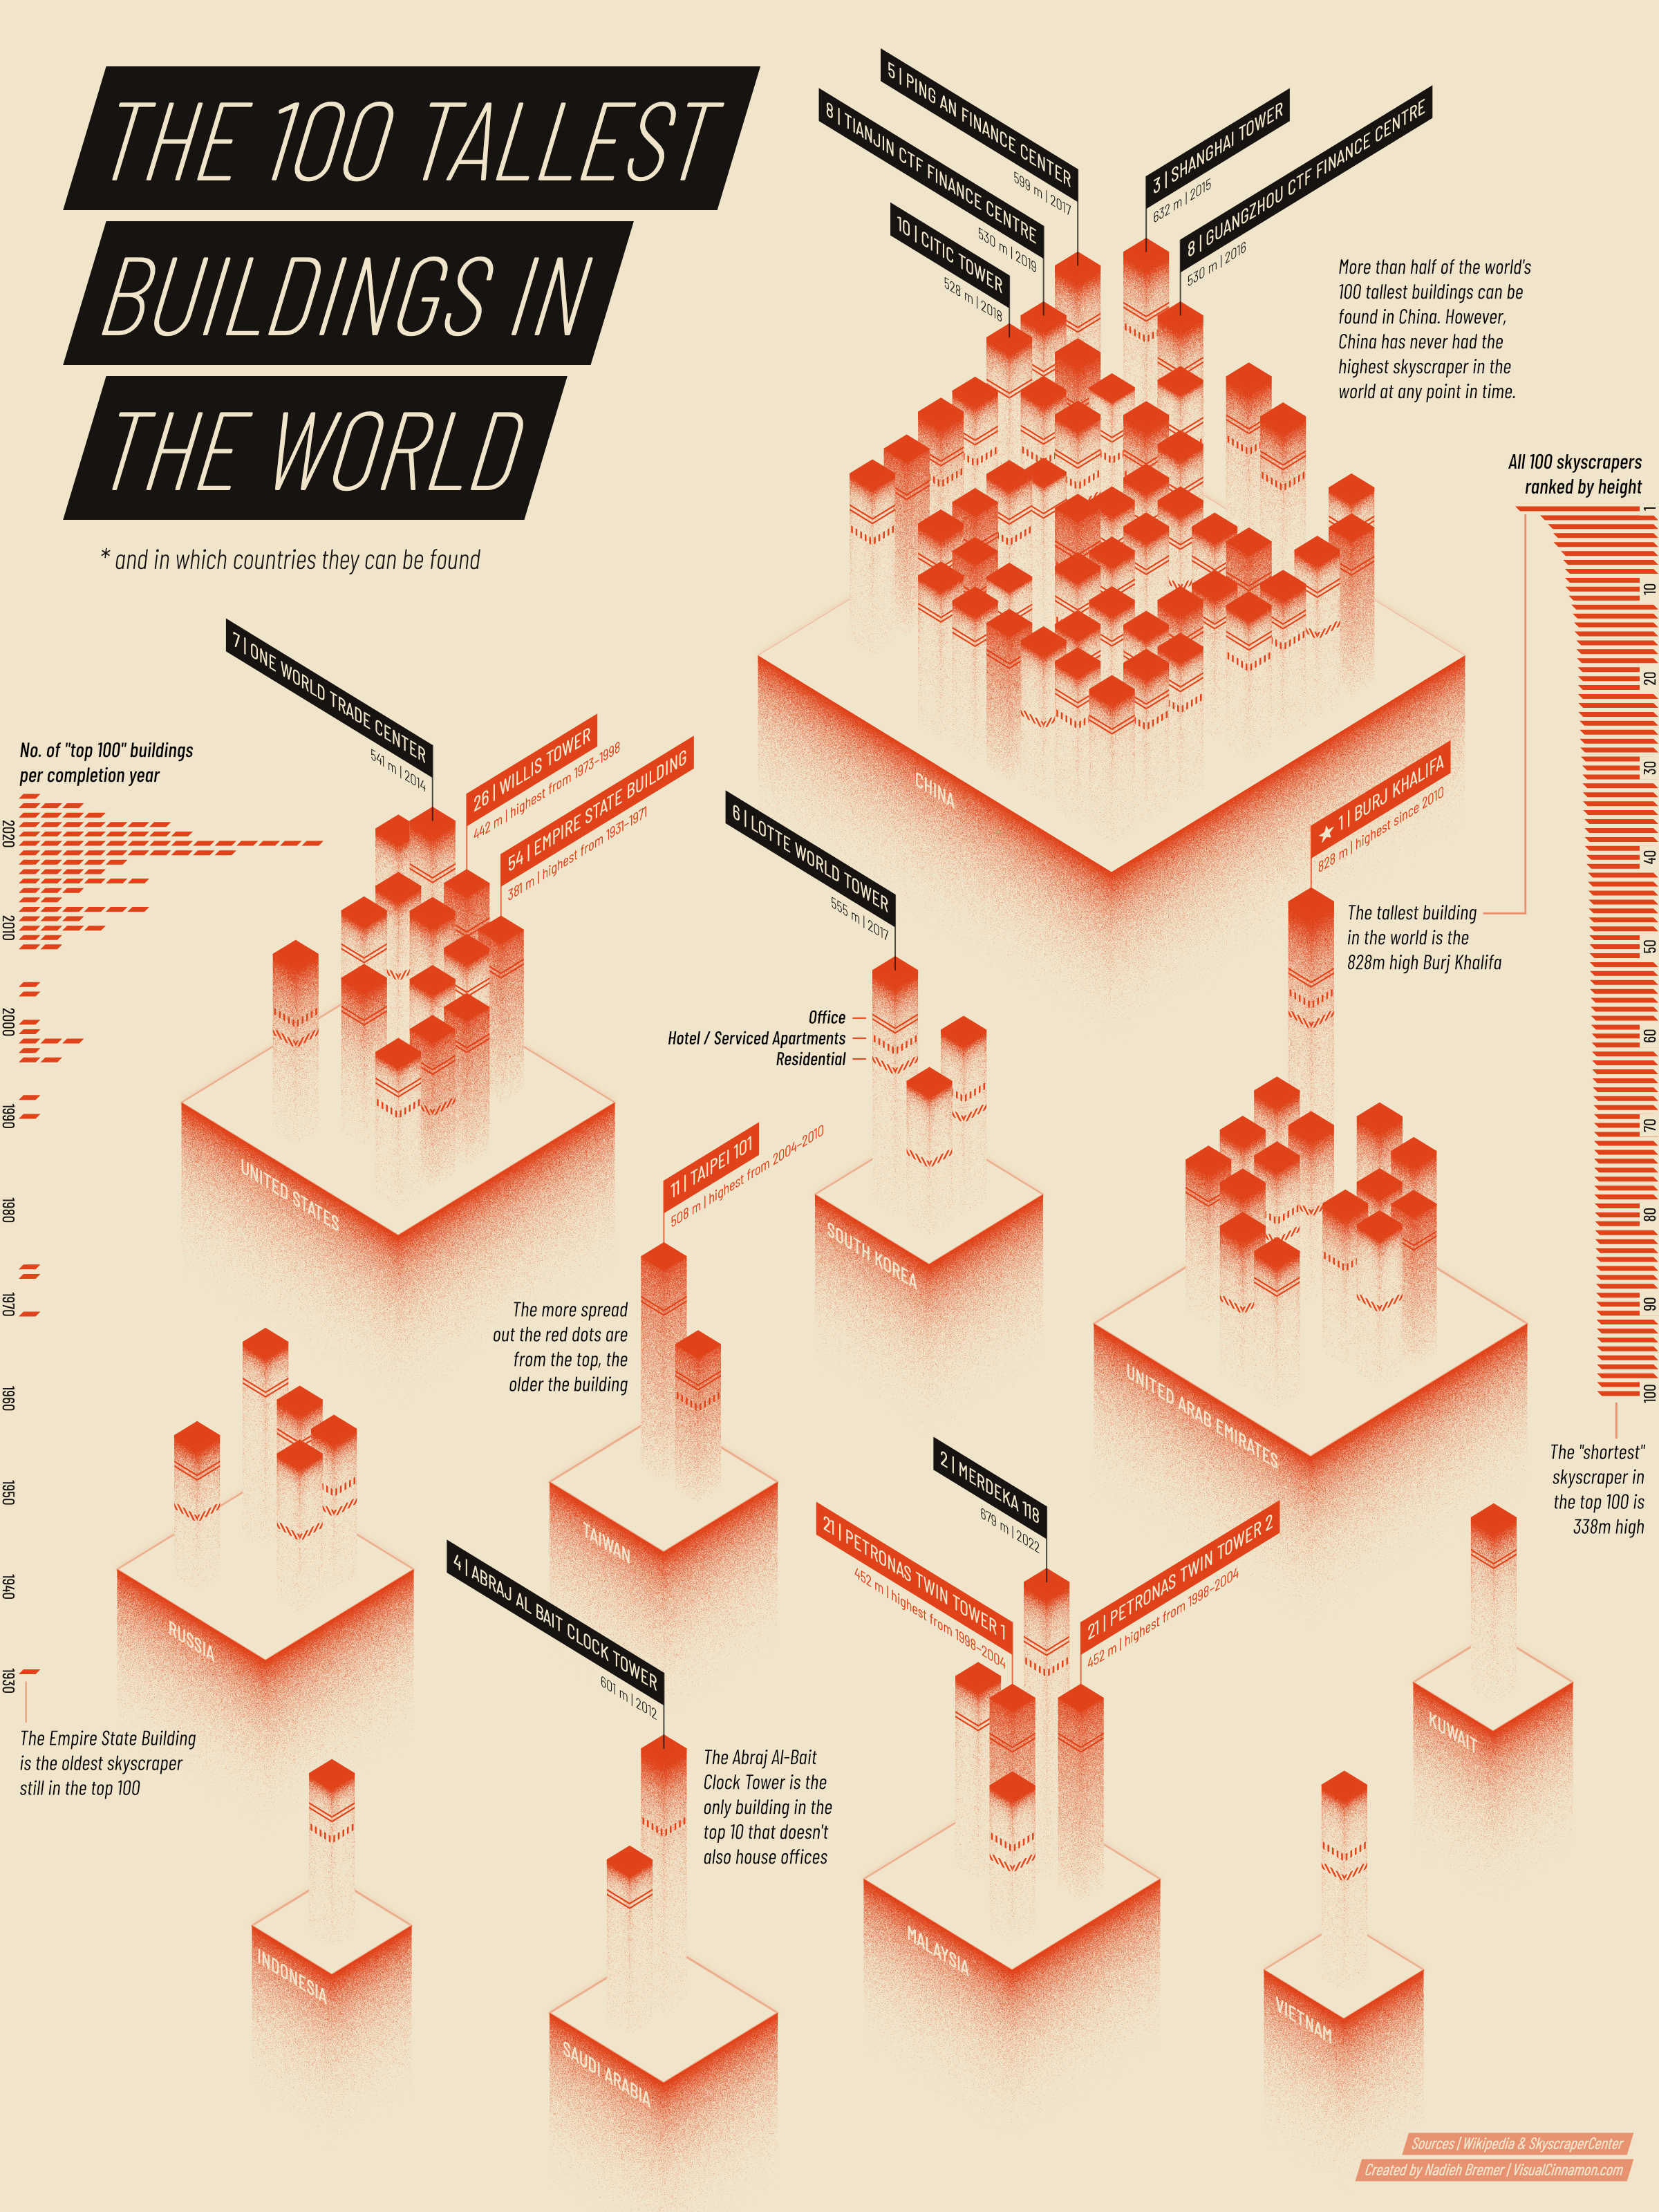 The data visualization showing the 100 tallest buildings in the world